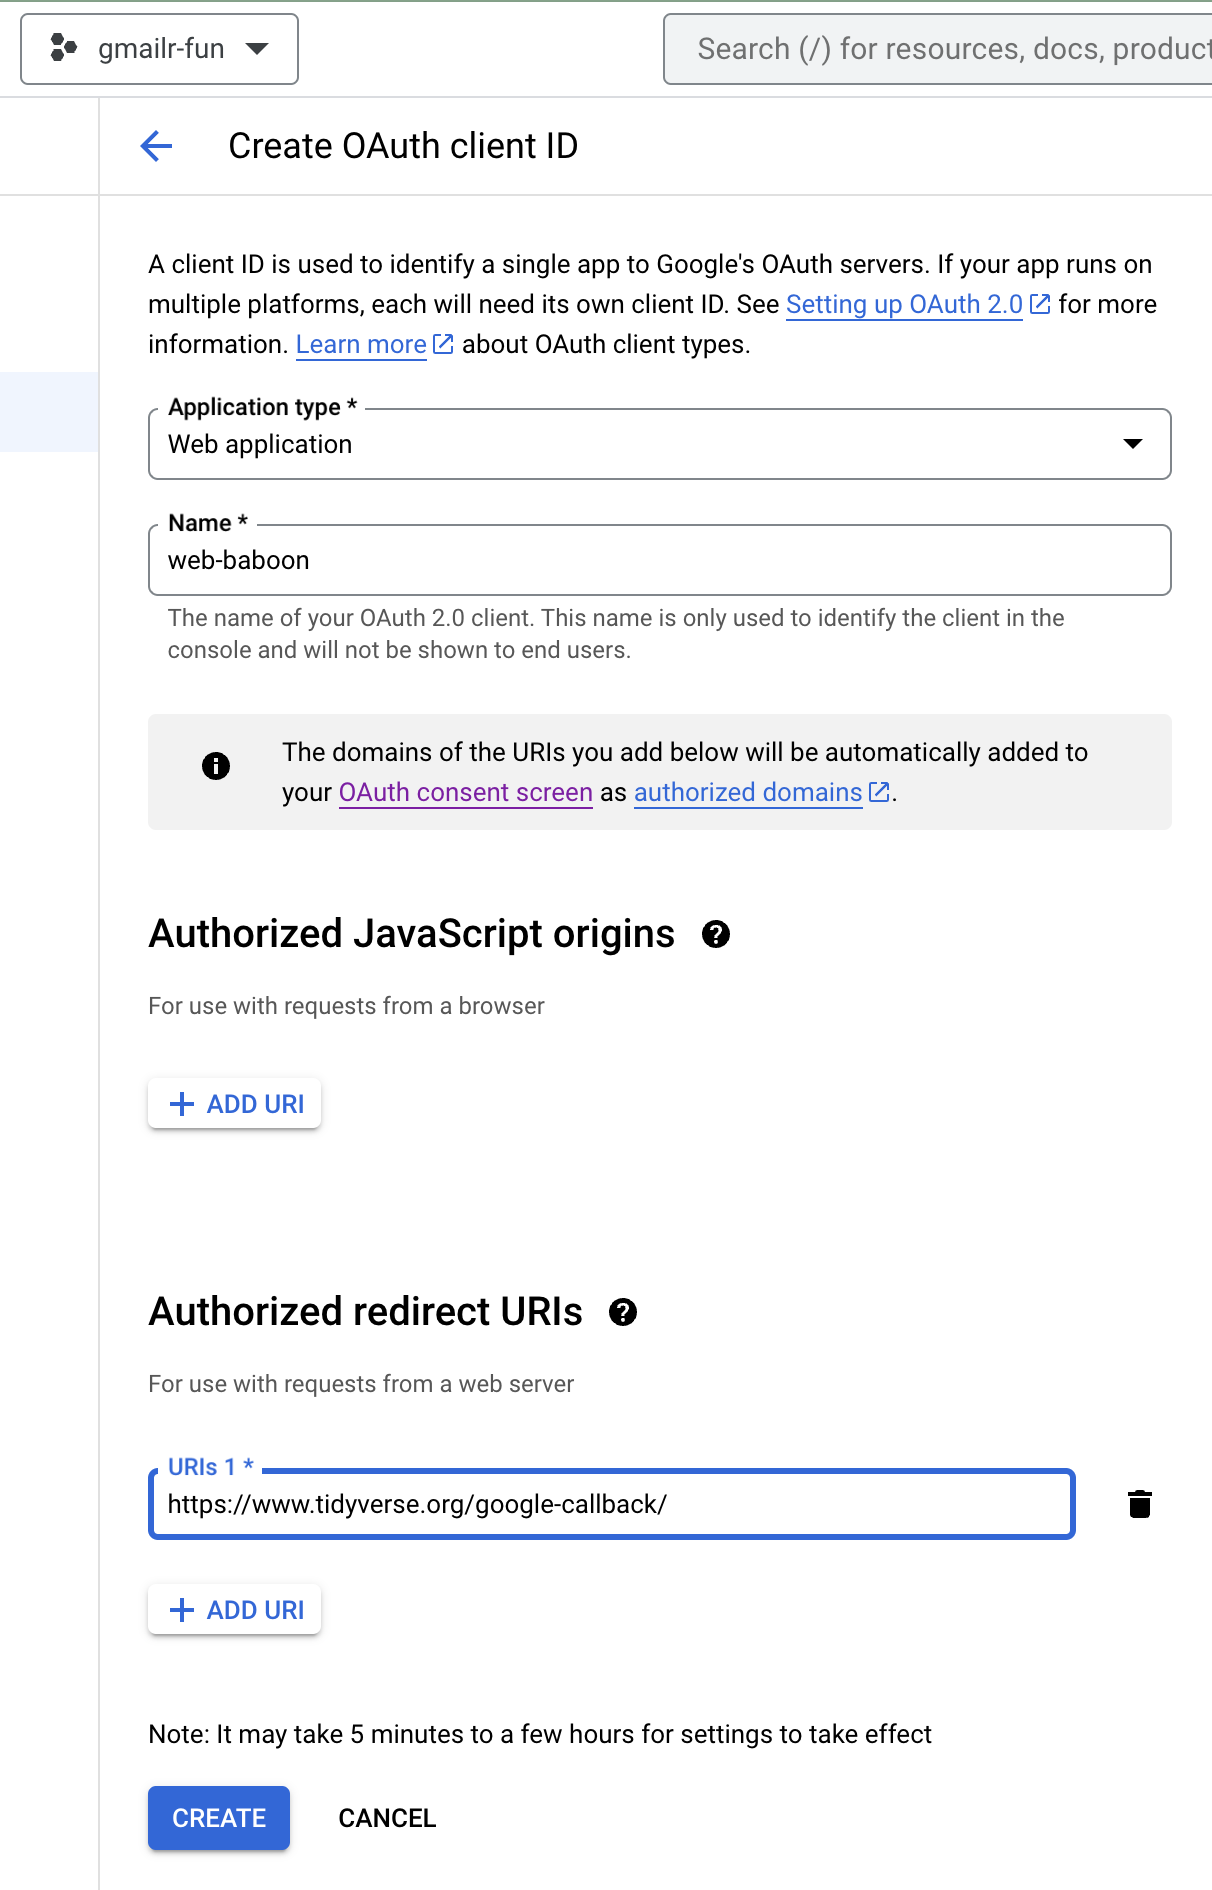 Screenshot of the "Create OAuth client ID" screen with "Web application" selected as the Application type and "web-baboon" filled in the "Name" box. There are arrows pointing at the "Name" box and the "CREATE" button.